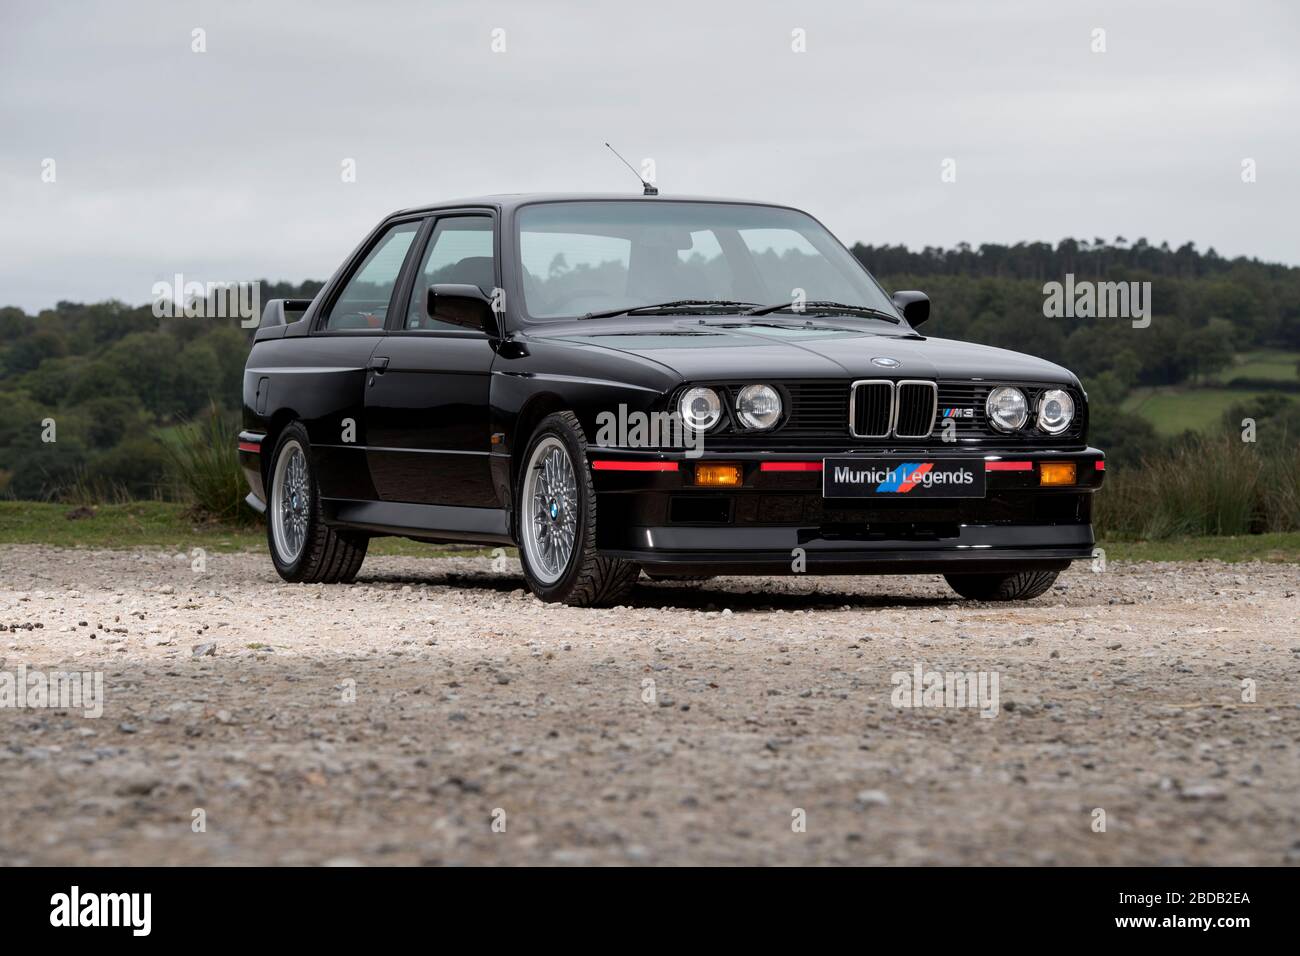 Bmw E30 M3 Classic Super Saloon From The 1980s Stock Photo Alamy